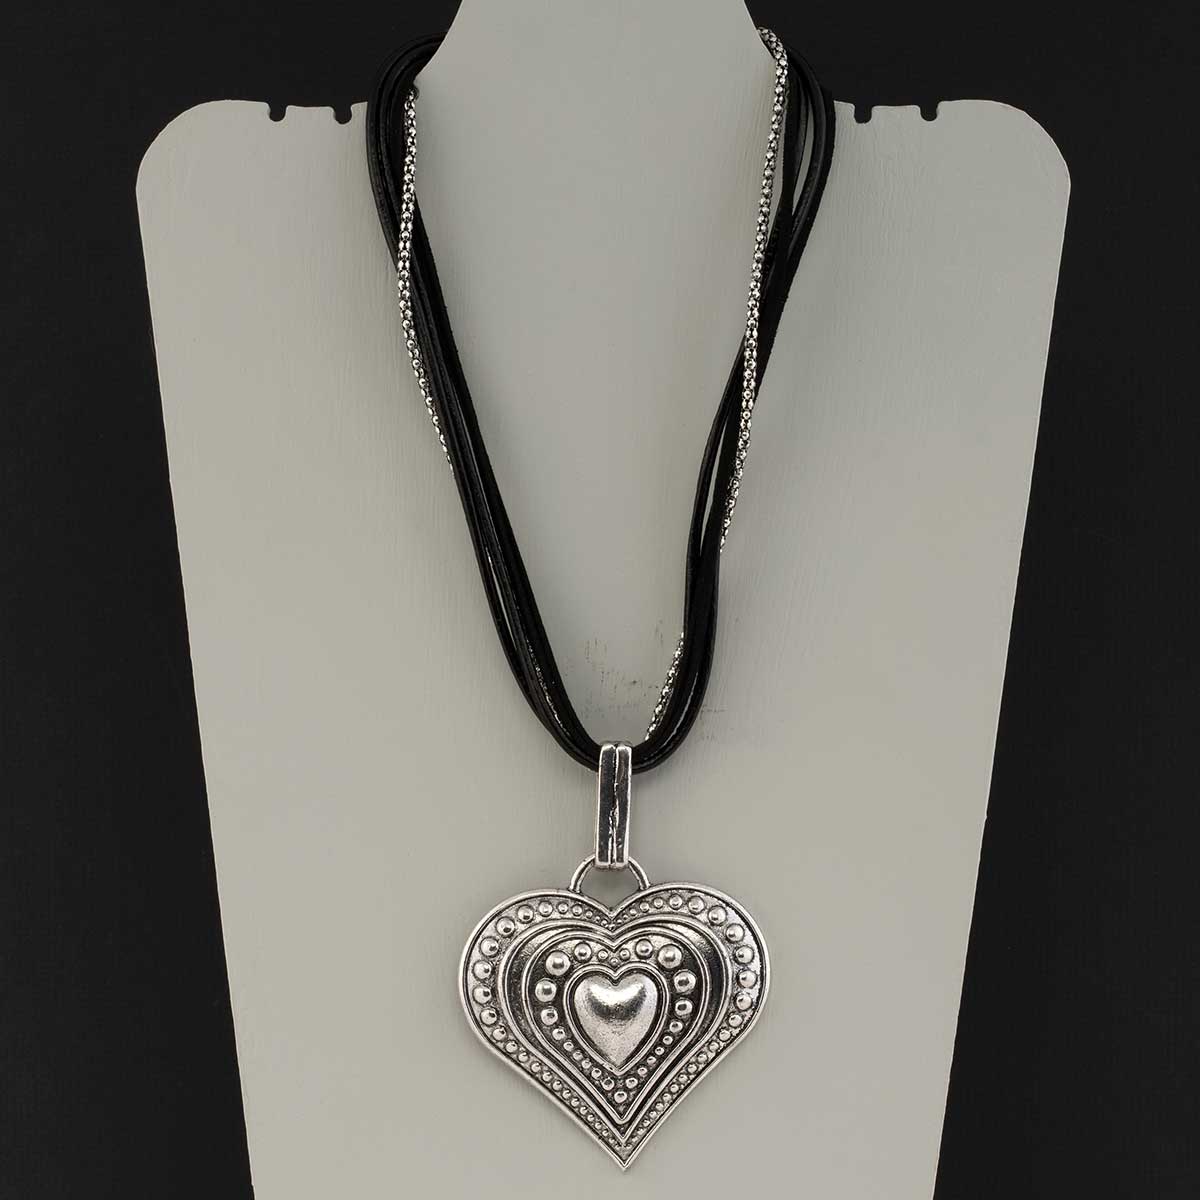 Antique Silver Heart Necklace on Black Cords and Chain 18"-20"